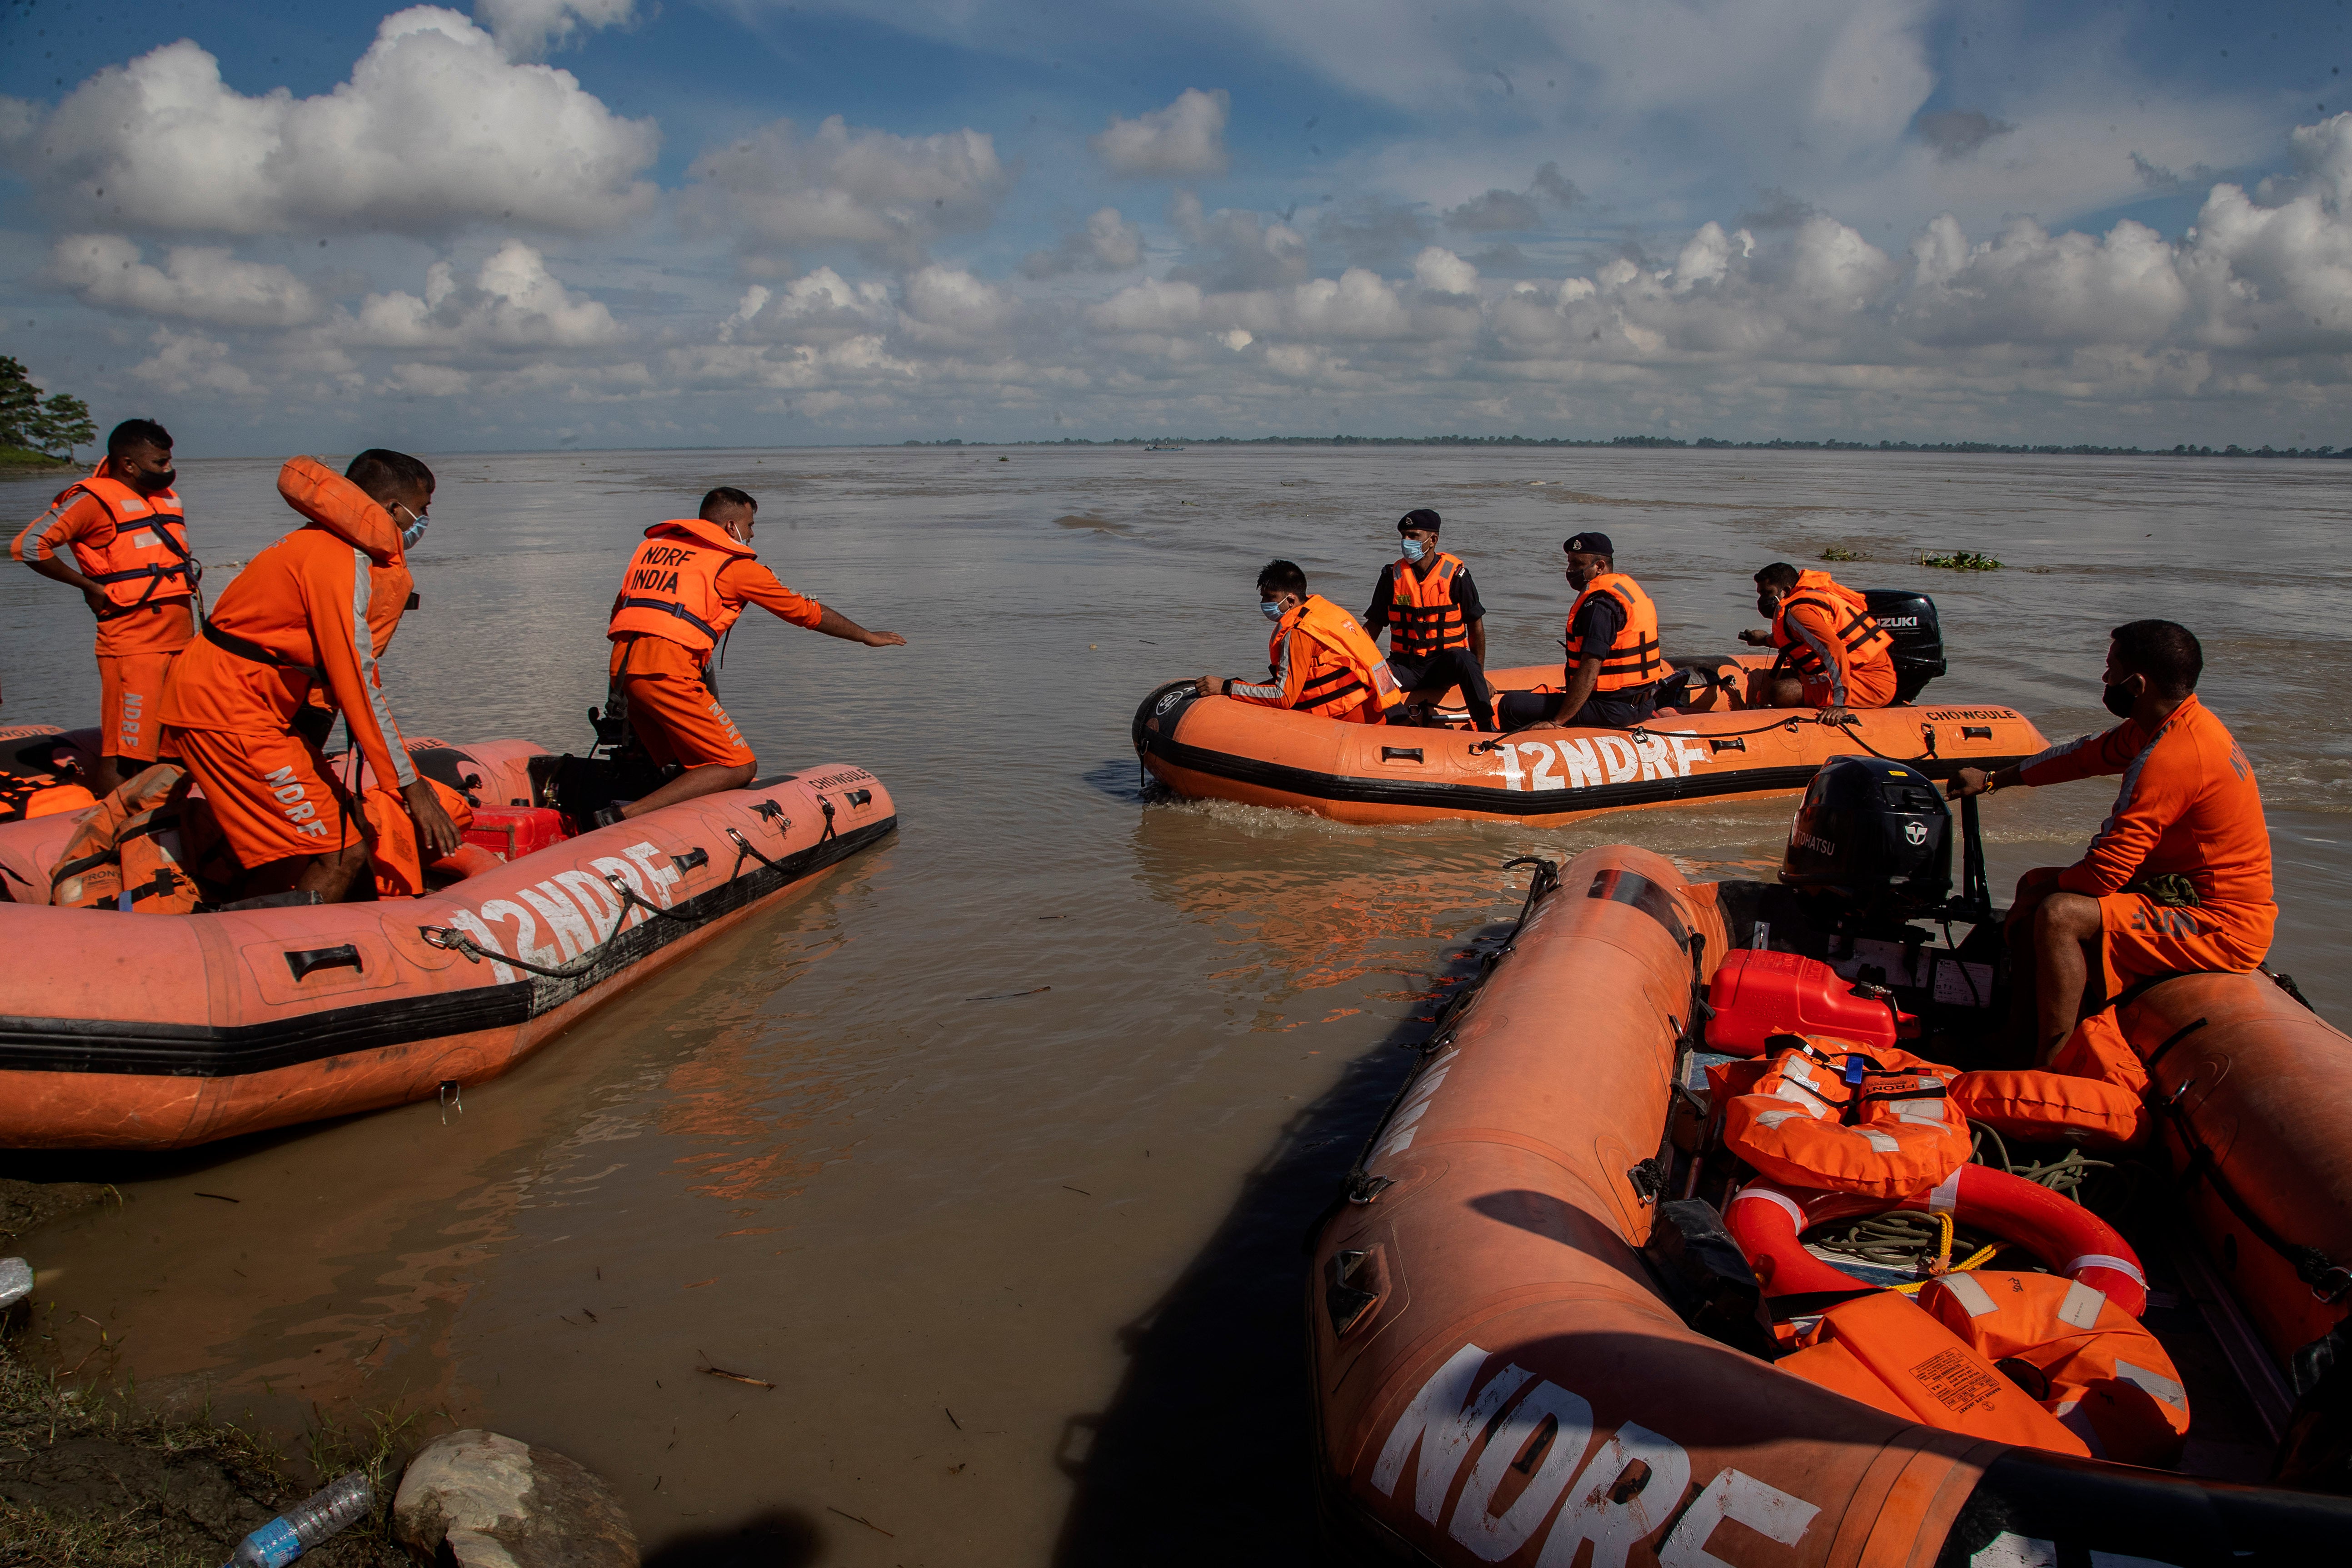 <p>National Disaster Response Force personnel search for missing people after two passenger ferries collided Wednesday in the river Brahmaputra, near Nimati Ghat, in Jorhat, about 350 kilometres (220 miles) from Gauhati, Assam state, India, Thursday, 9 September 2021</p>